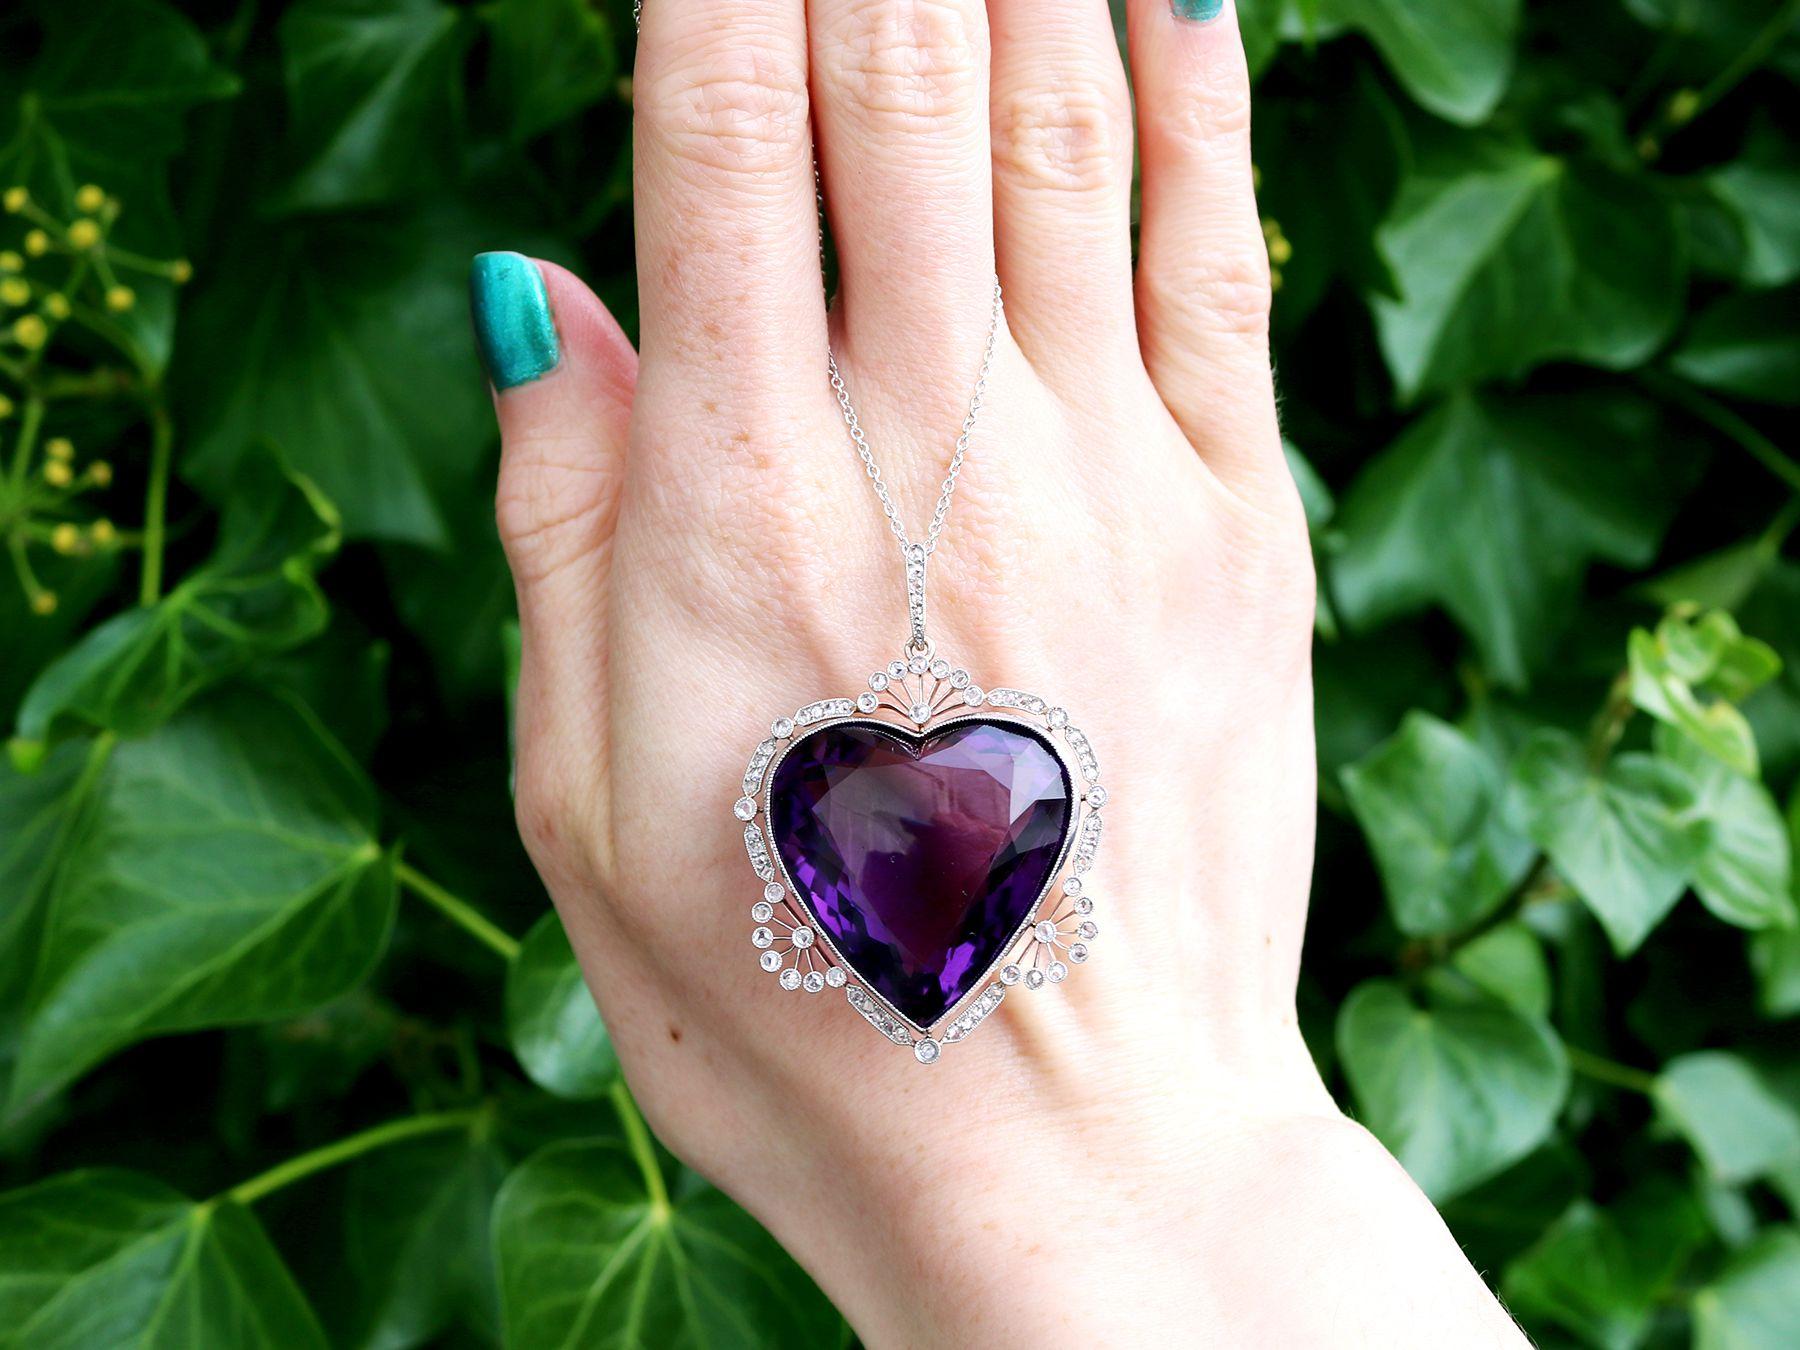 A magnificent, fine and impressive 45.27 carat amethyst and 0.95 carat diamond, 18 carat yellow gold and platinum set heart pendant; part of our diverse antique jewelry and estate jewelry collections. 

This magnificent, fine and impressive amethyst